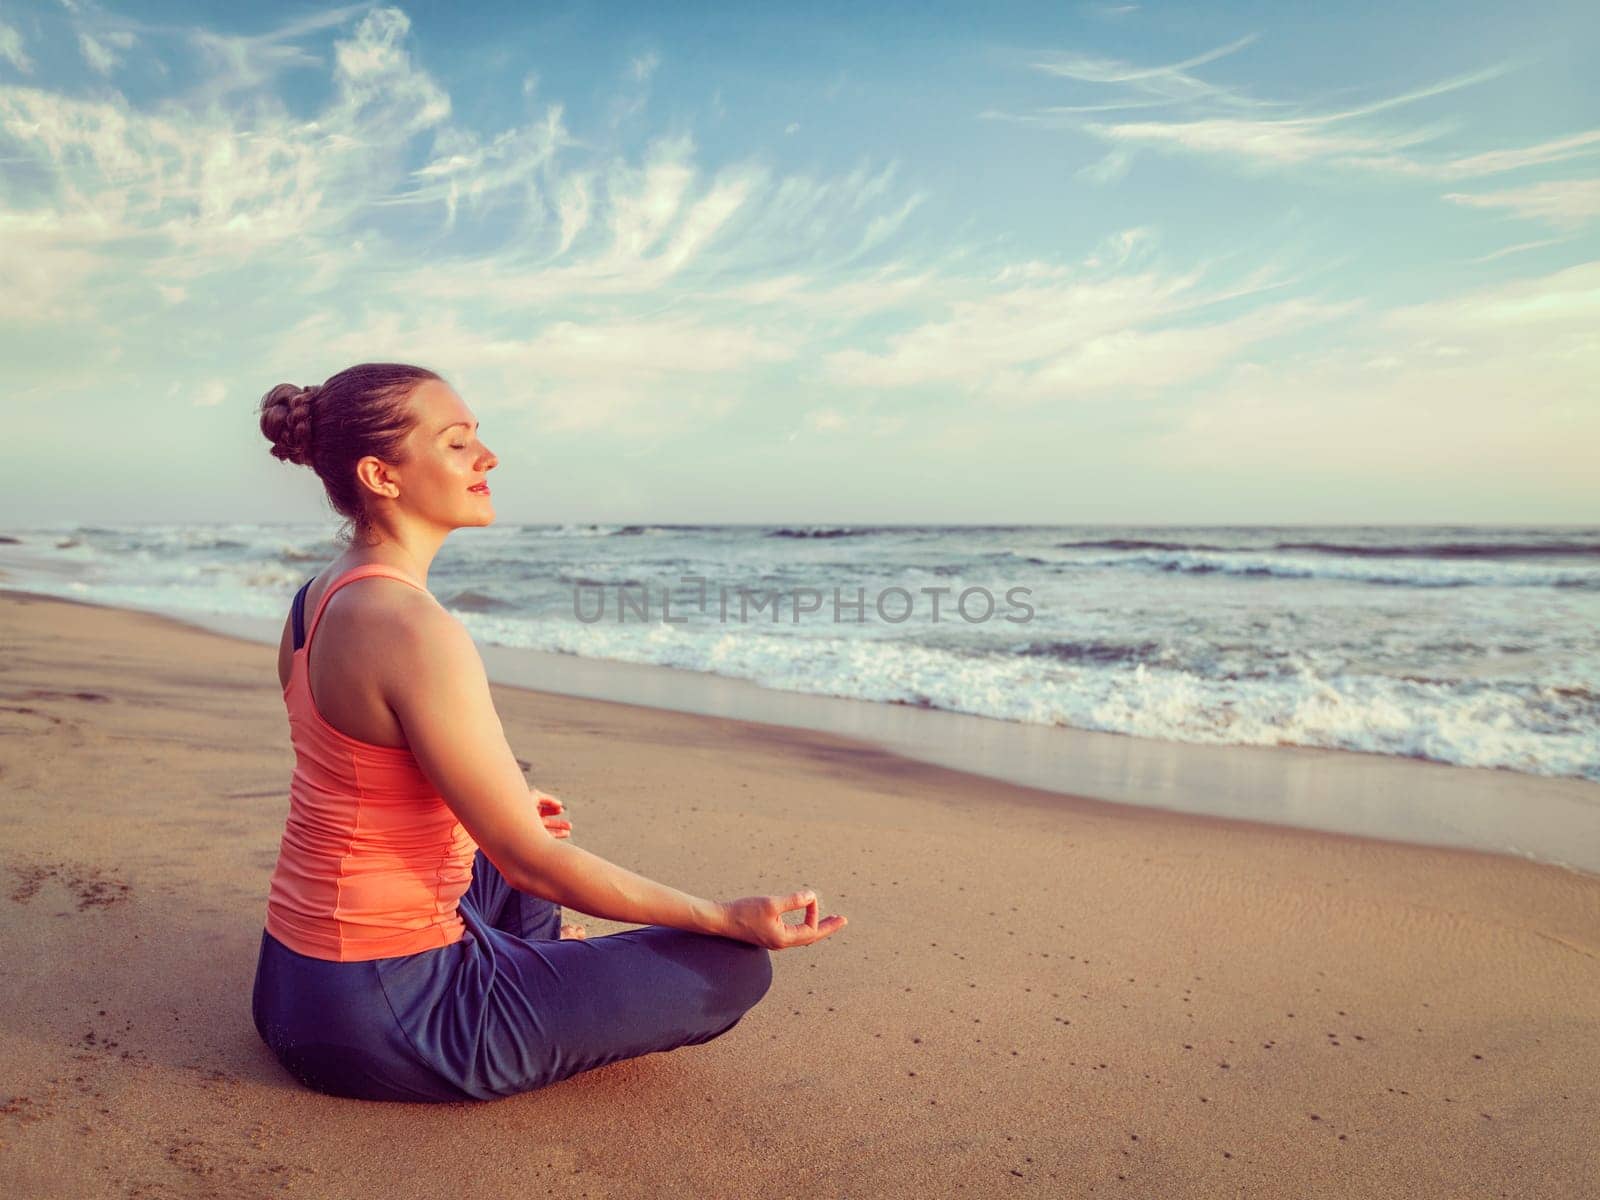 Vintage retro hipster effect image of woman doing yoga meditating and relaxing in Padmasana Lotus Pose with chin mudra outdoors at tropical beach on sunset